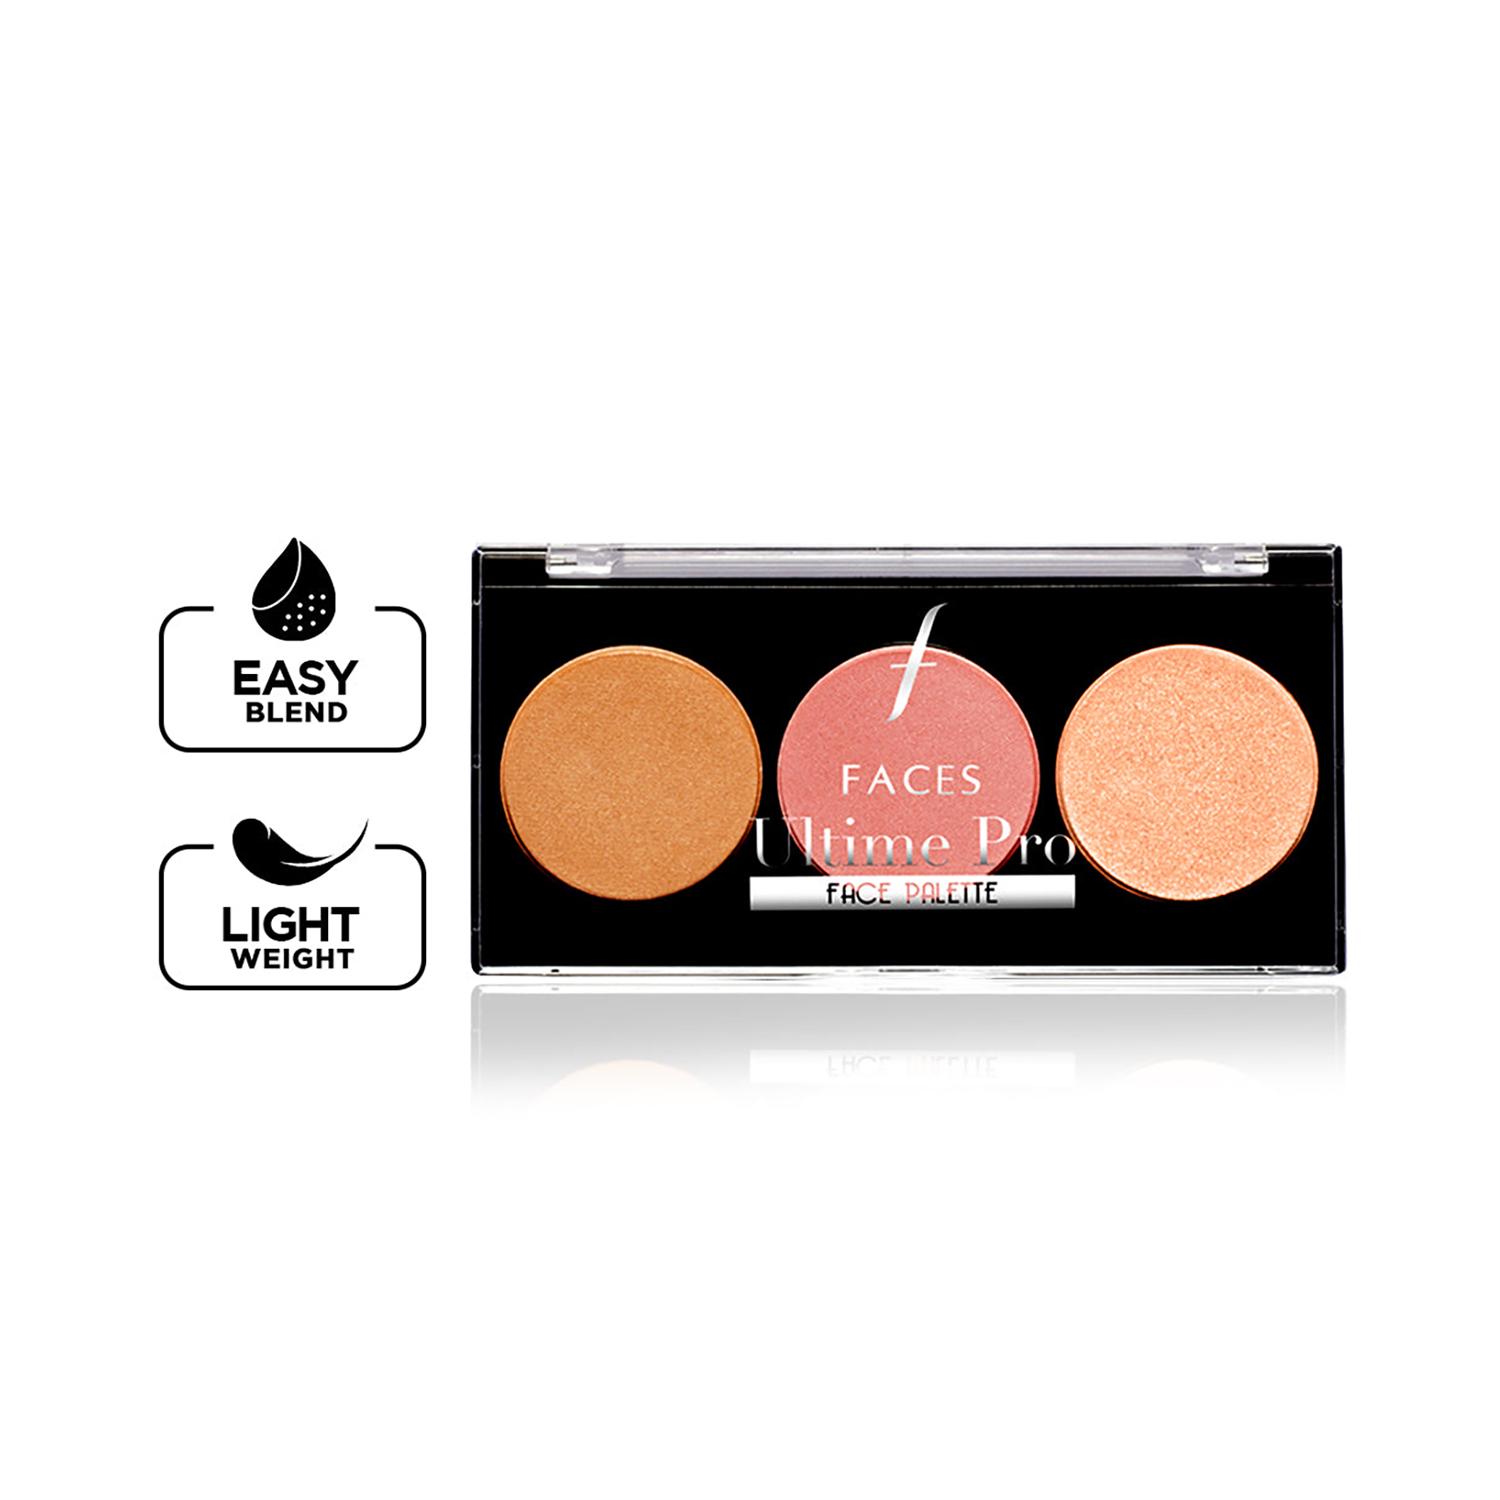 Faces Canada | Faces Canada Ultime Pro Face Palette - Glow, 3in1 Bronzer+Highlighter+Blush, Shimmer Finish (12 g)